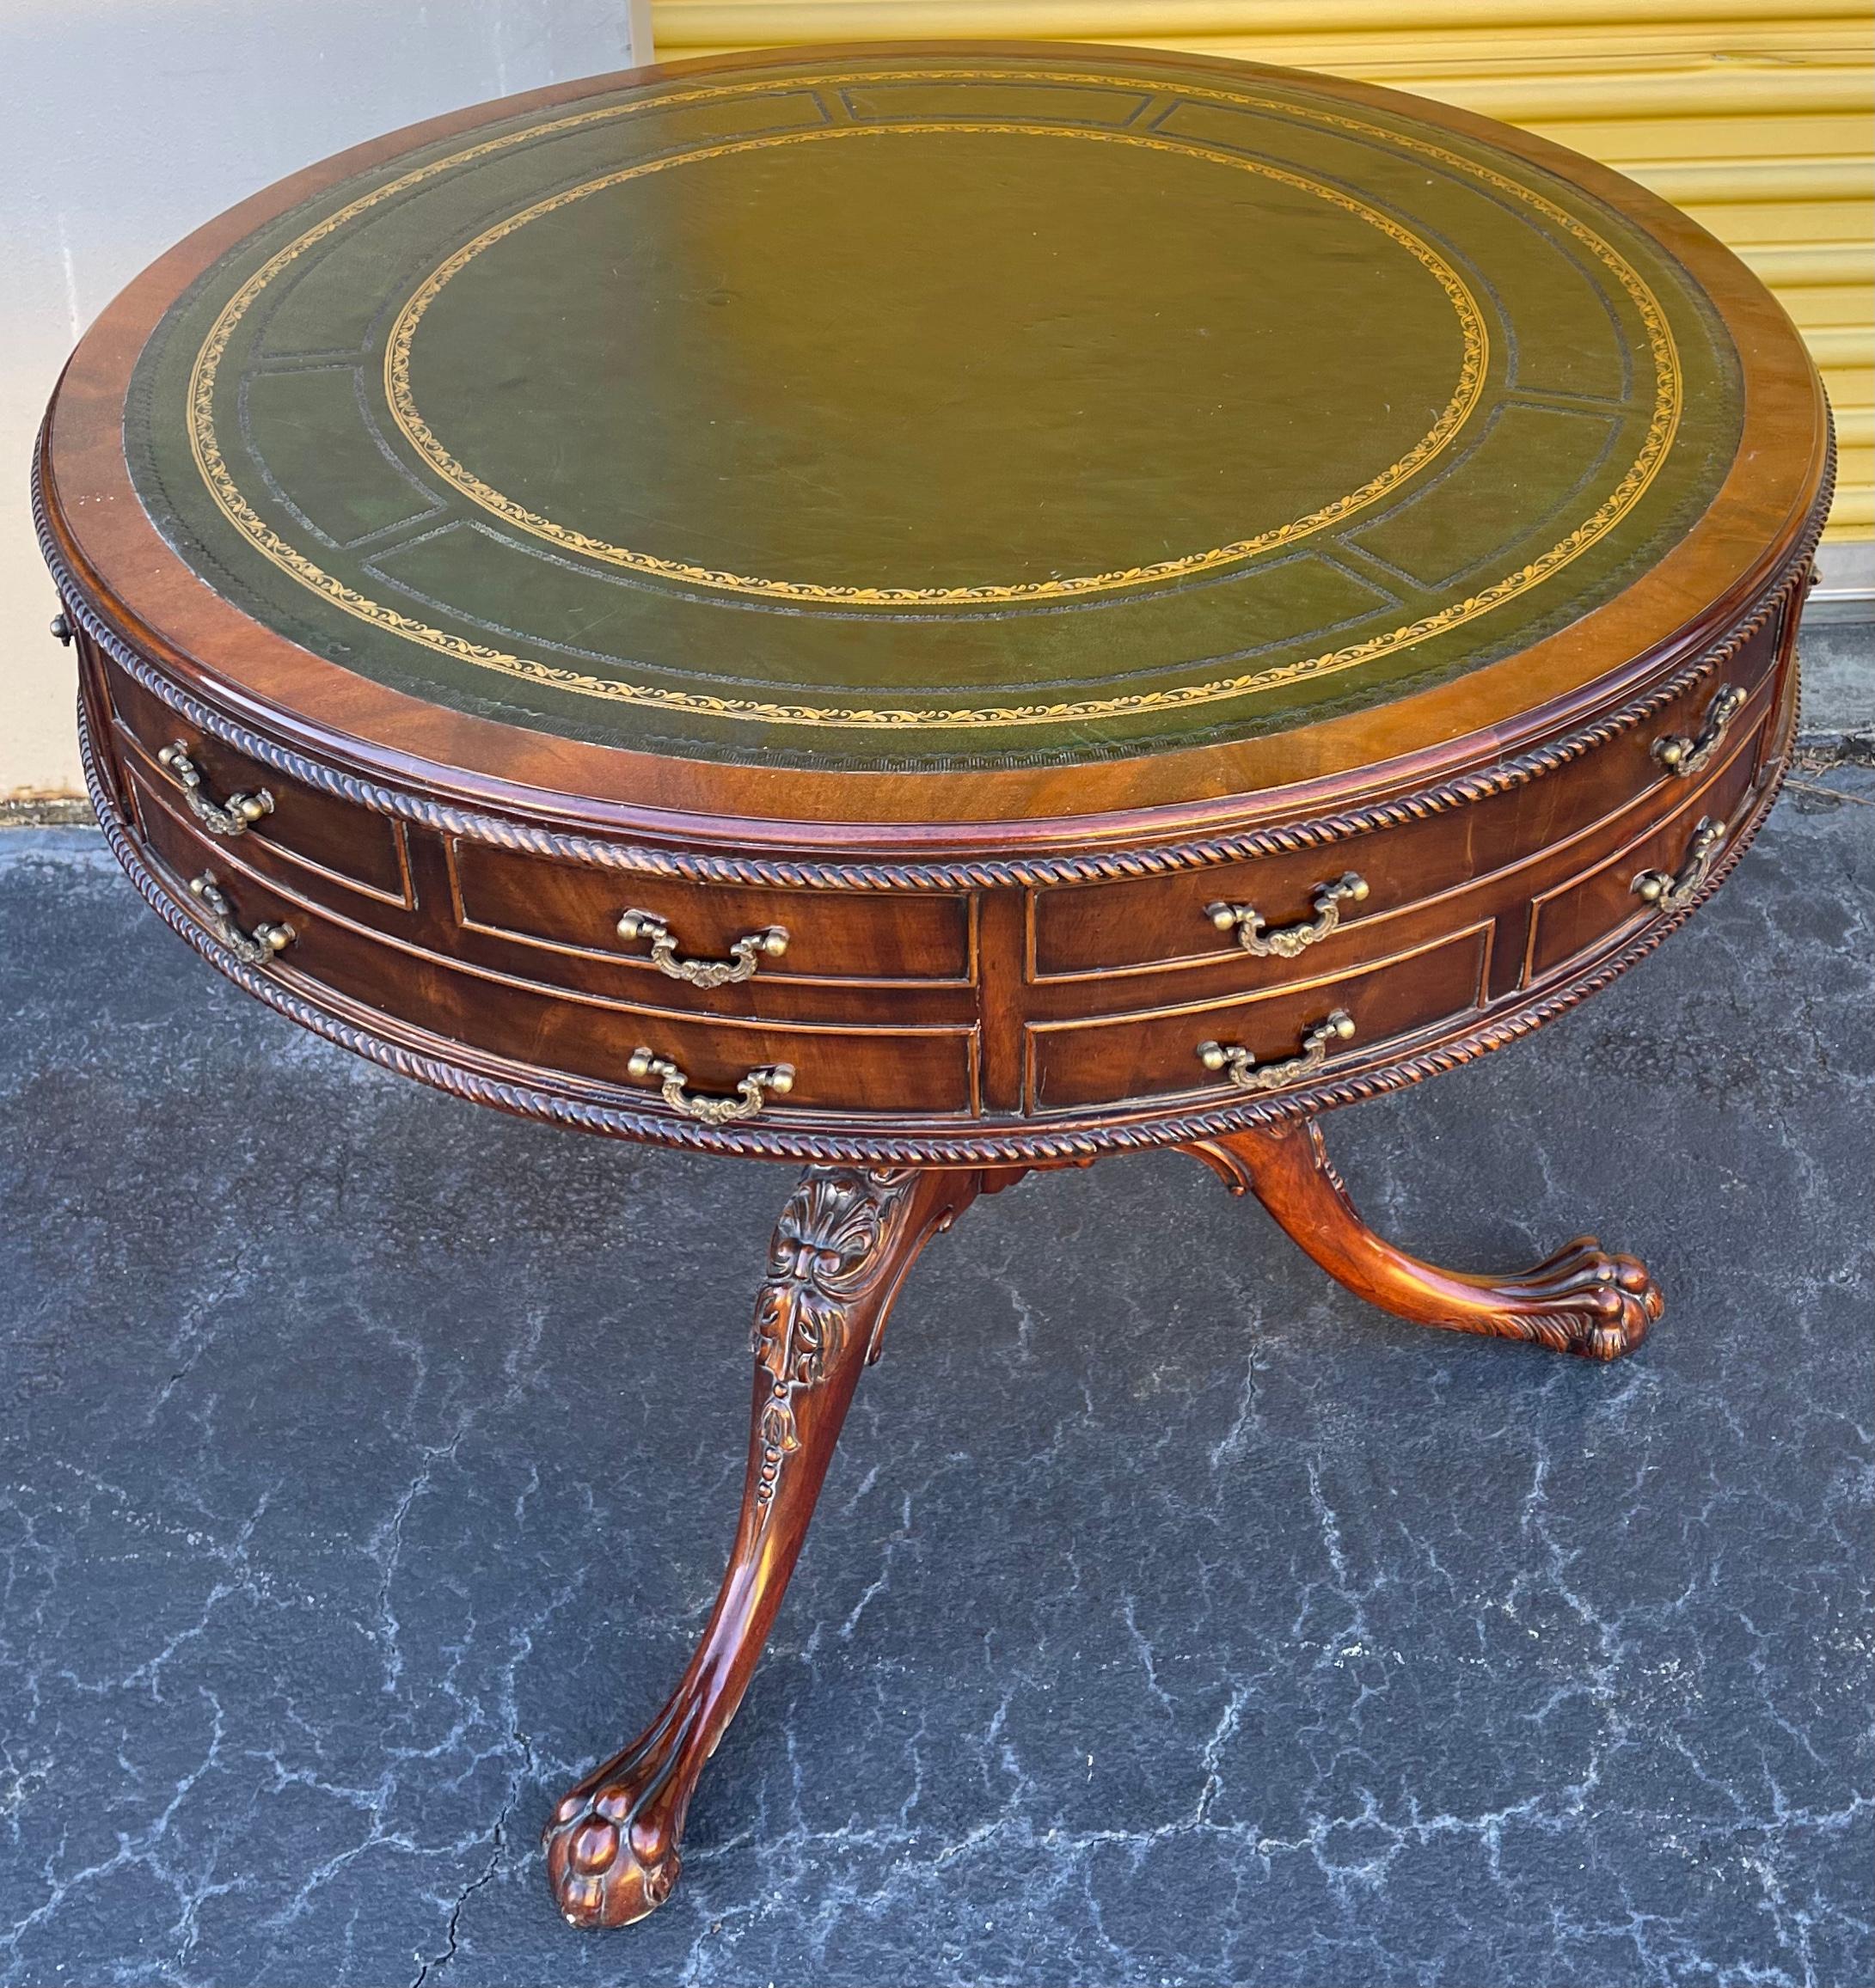 20th Century English Leather Top Georgian Style Mahogany Drum Table with Ball & Claw Feet For Sale